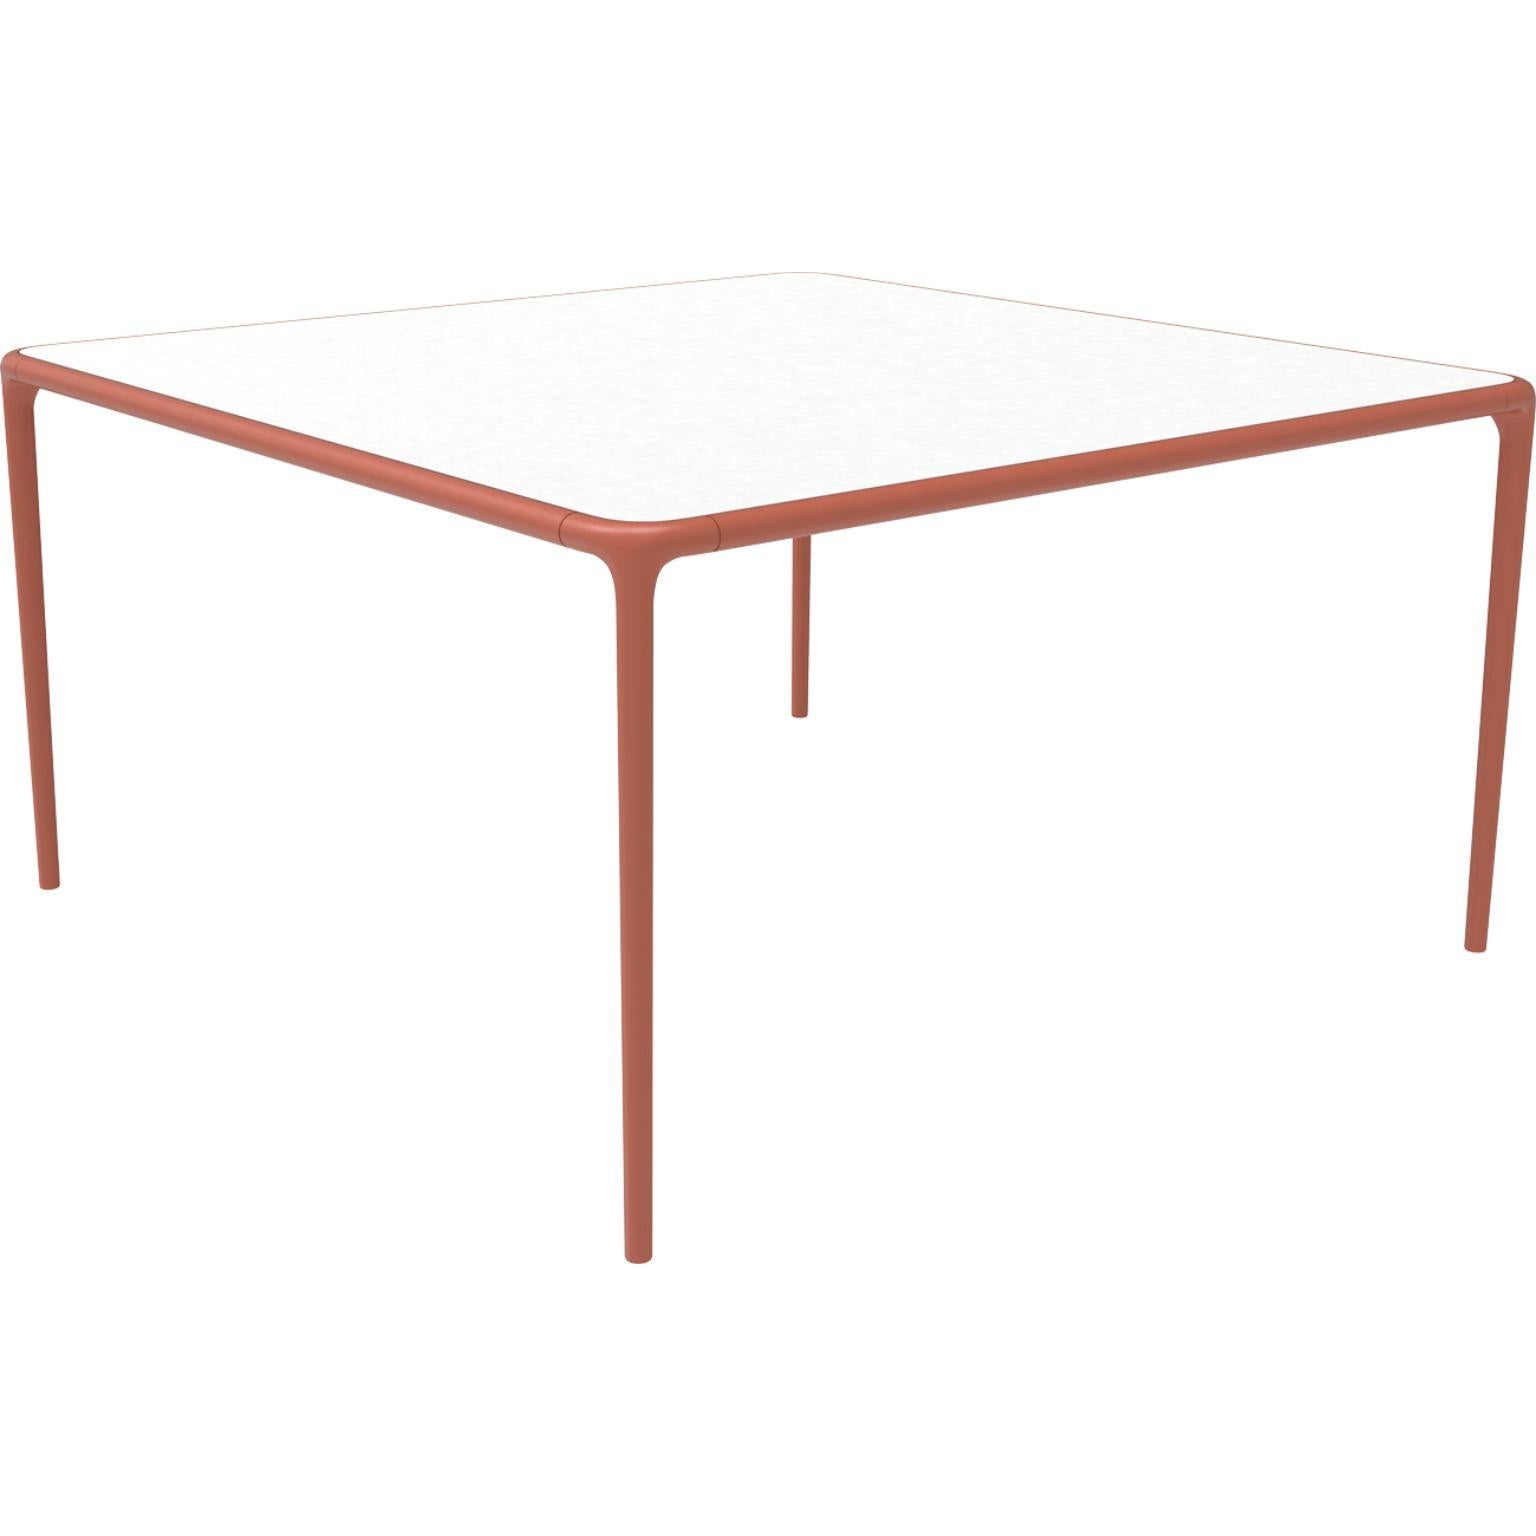 Xaloc Salmon glass top table 140 by Mowee
Dimensions: D 140 x W 140 x H 74 cm
Material: Aluminum, tinted tempered glass top.
Also available in different aluminum colors and finishes (HPL Black Edge or Neolith).

 Xaloc synthesizes the lines of